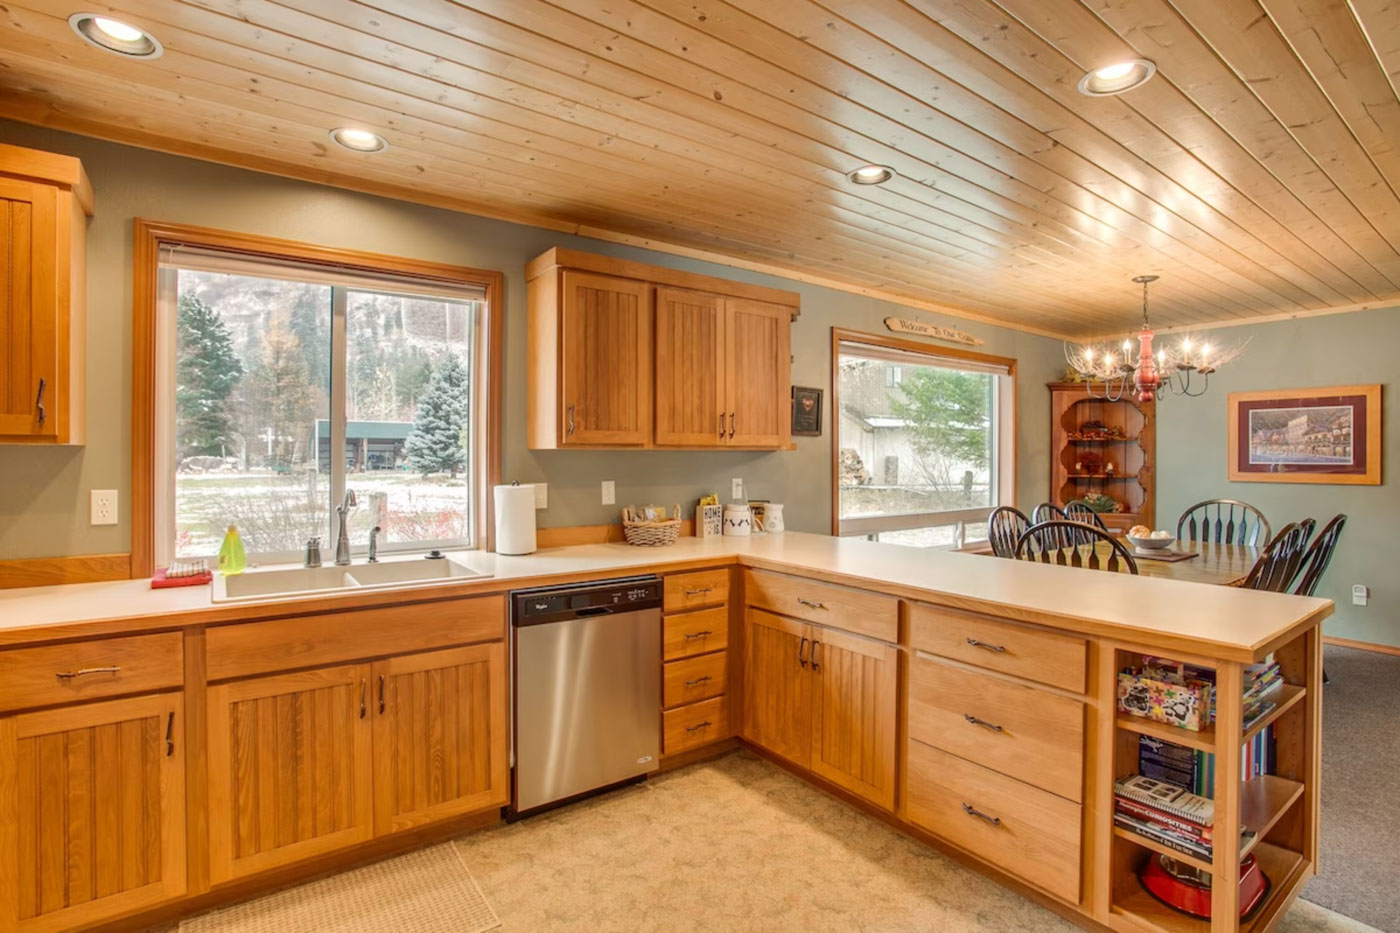 The kitchen and dining area of the Serene Mountain View Cabin with a wooden finish.